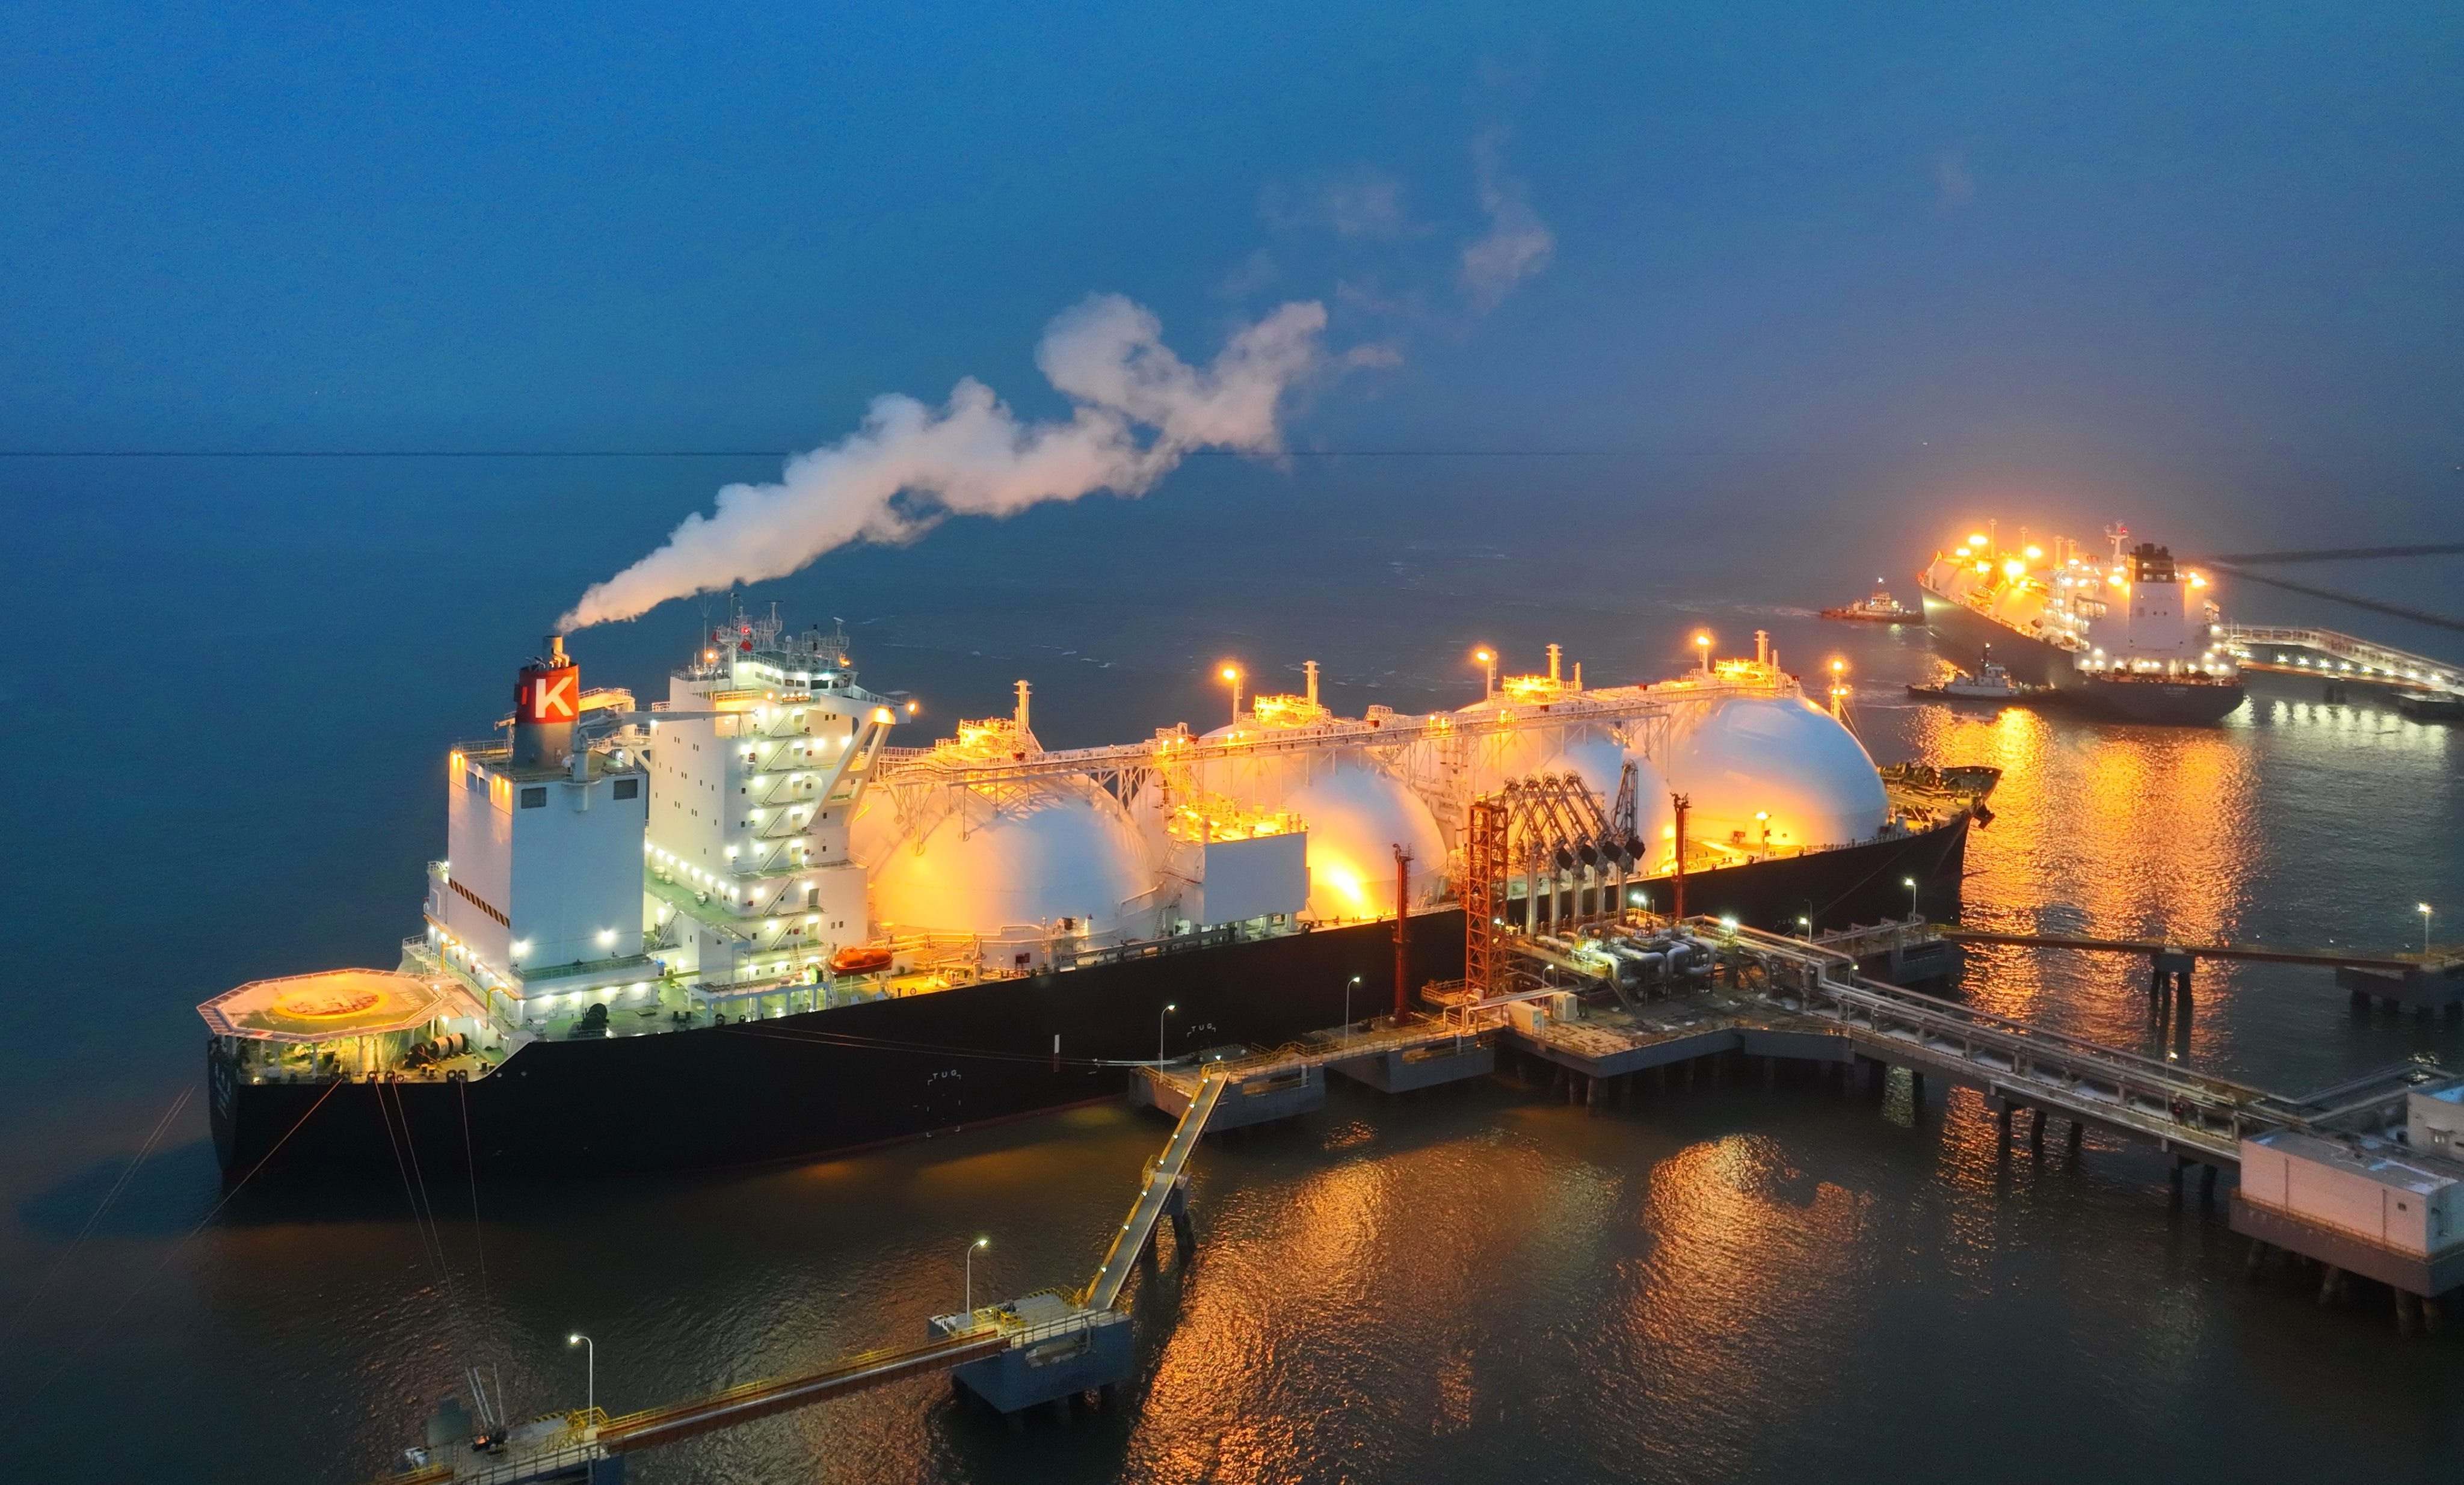 Two liquefied natural gas (LNG) carriers are seen berthed in December at China’s first two-berth LNG terminal operated by China Petrochemical Corporation (Sinopec Group) in Tianjin. Photo: Getty Images